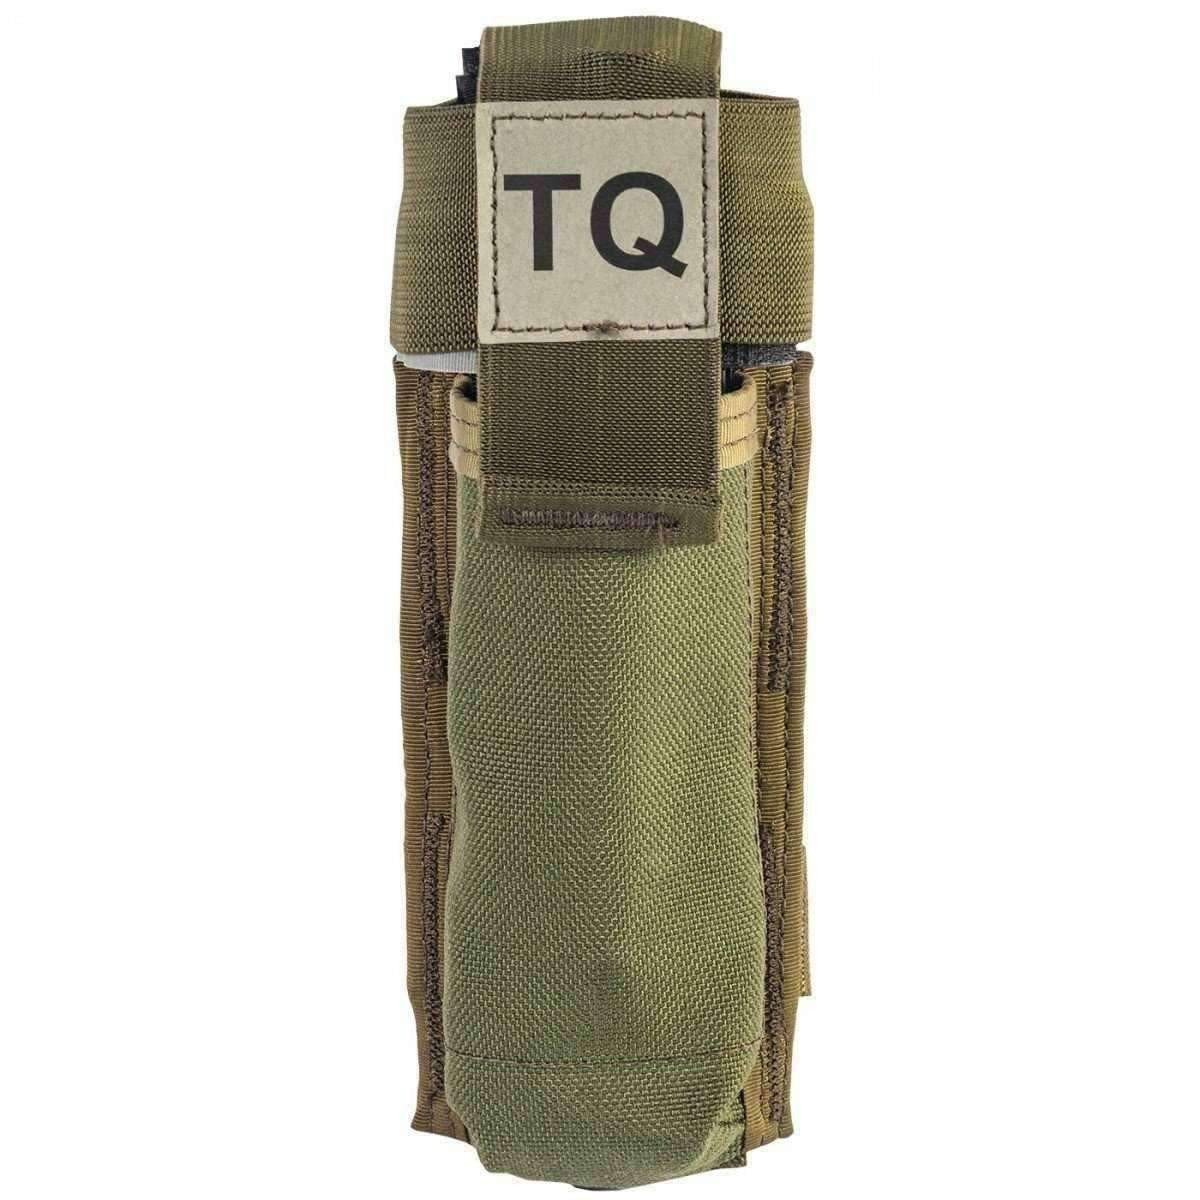 NAR CAT Tourniquet Pouch - MED-TAC International Corp. - North American Rescue